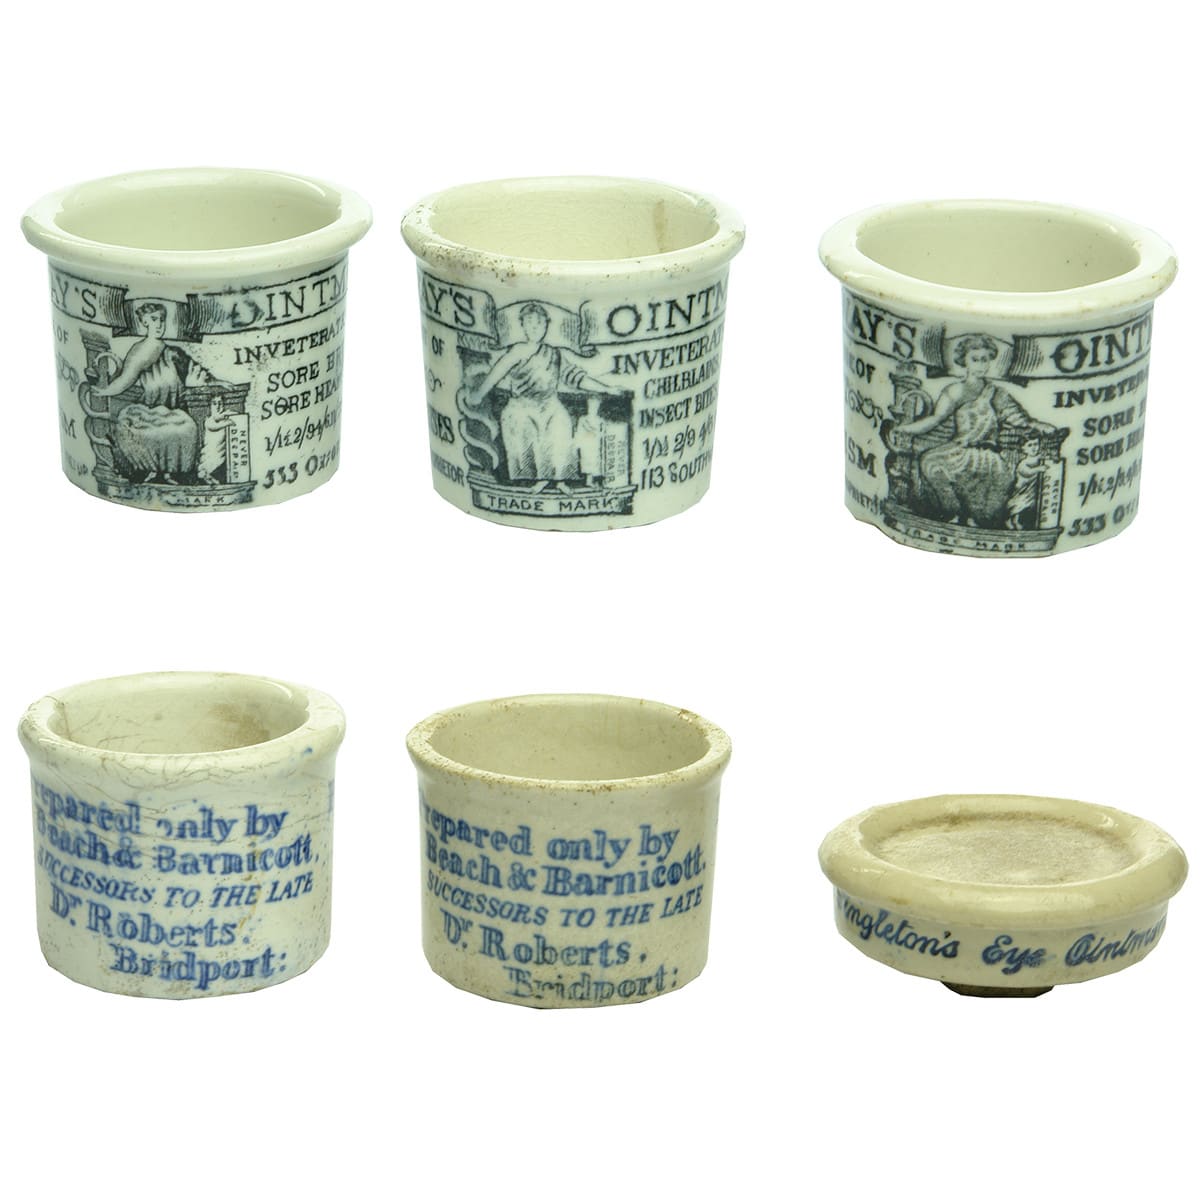 6 Pots. Three Holloway's Ointment Pots, 2 x 533 Oxford St, 1 x 113 Southwark St. Two Beach & Barnicott, Poor Mans Friend Ointment Pots and a Singleton's Eye Ointment. (United Kingdom)